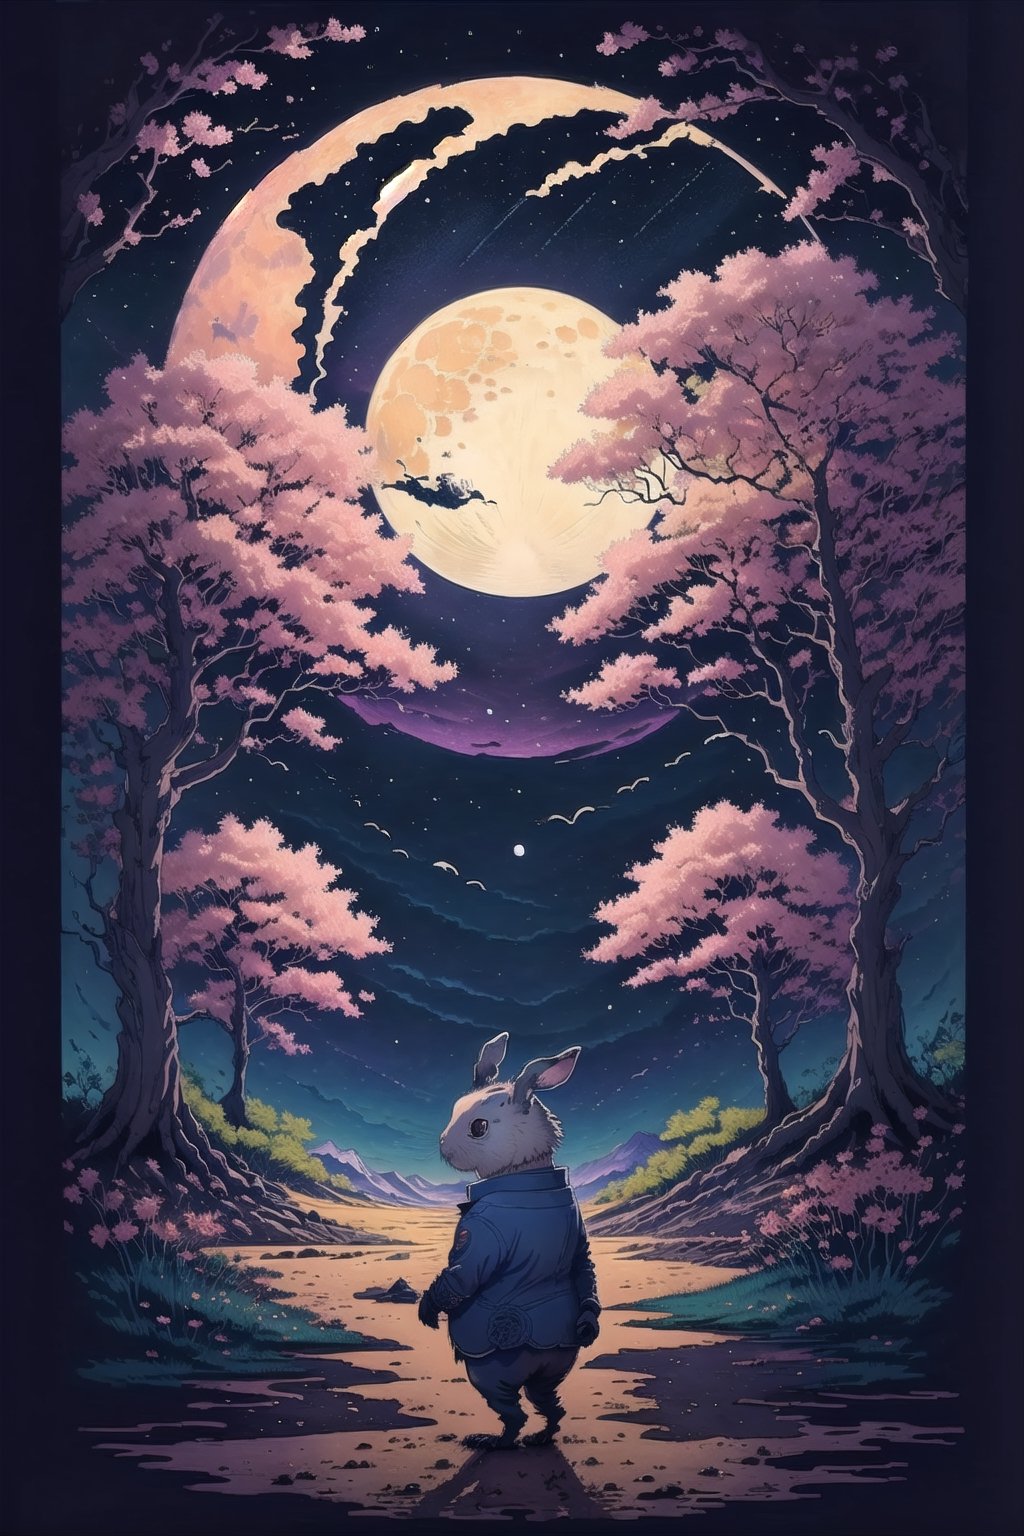  ((ink drawning and pencil shading)), an abstract painting imbued with melancholy romanticism,  The center of the composition is a rabbit standing alone under a sakura tree, in beautiful moon night.(masterpiece, top quality, best quality, official art, beautiful and aesthetic:1.2),tshee00d